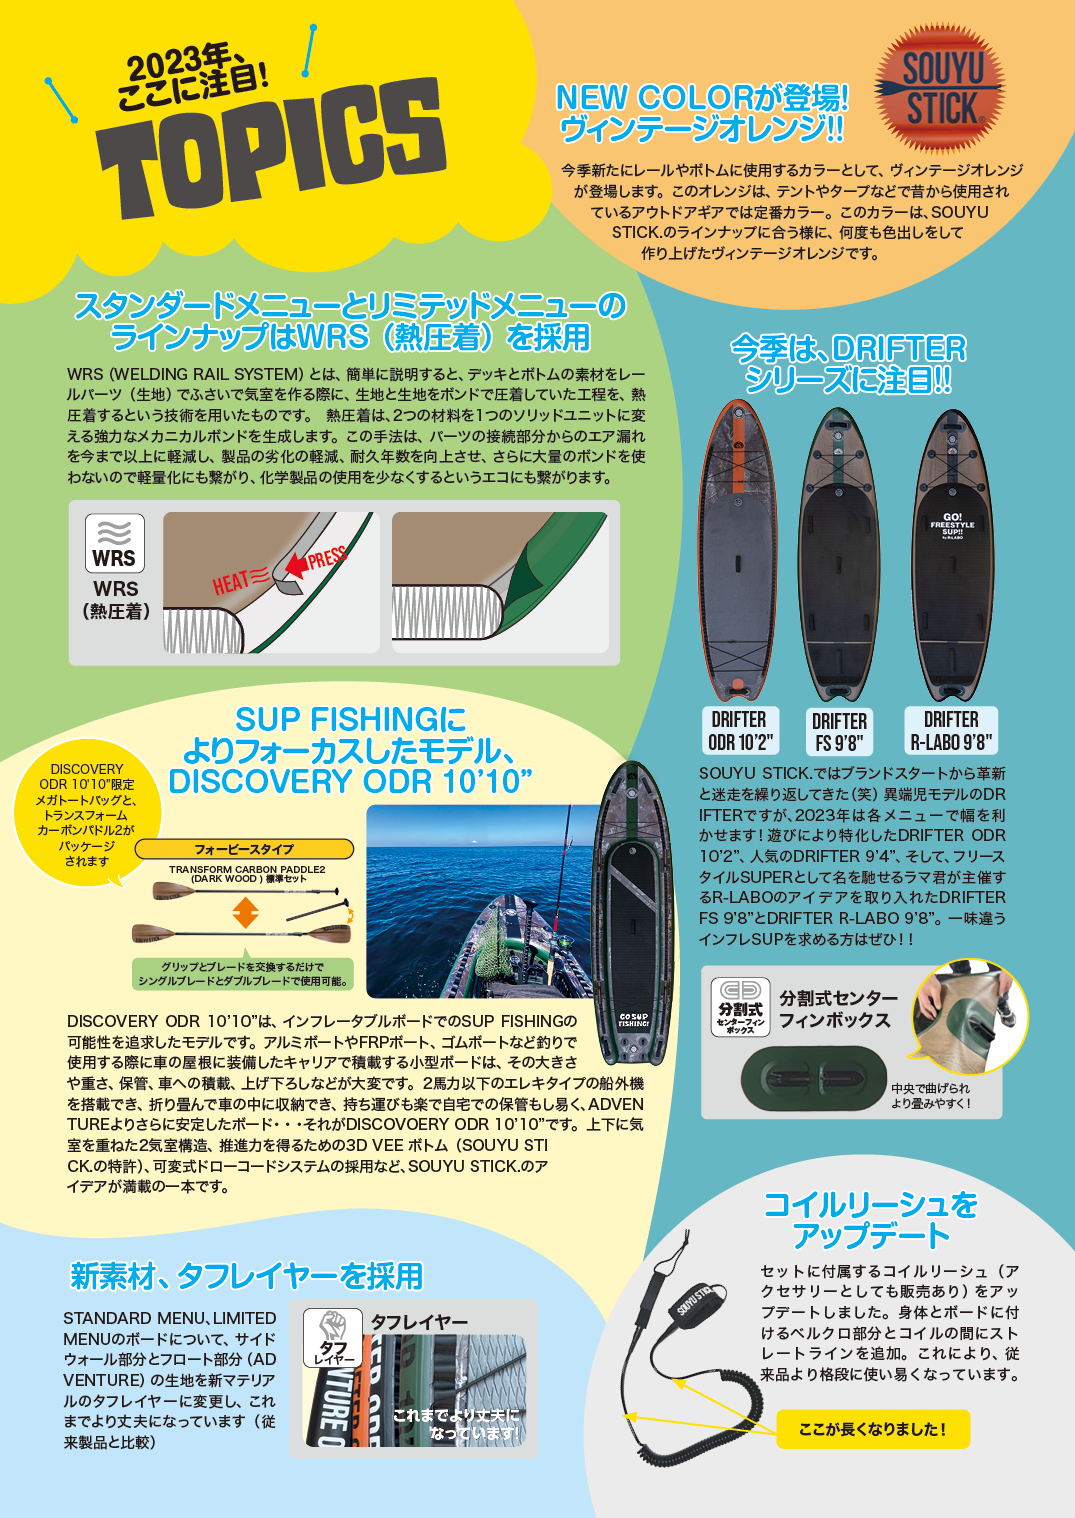 SOUYU STICK® – Inflatable SUP for OUTDOOR. アウトドアを楽しむため 